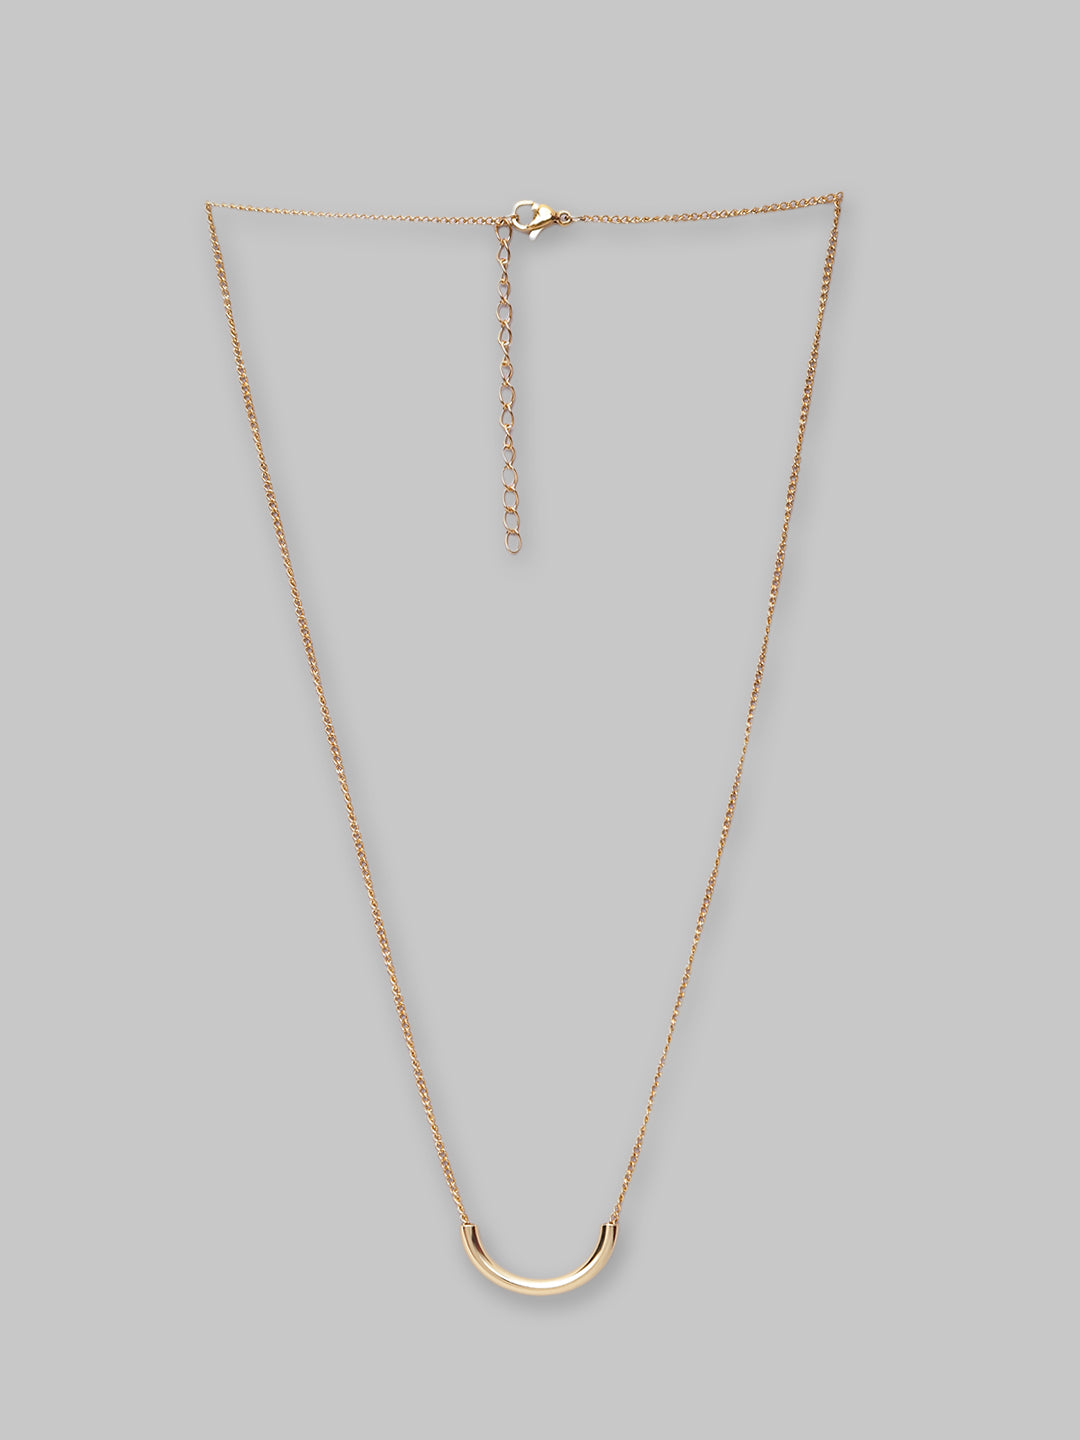 Classic Gold Lightweight Chain For Women And Girls